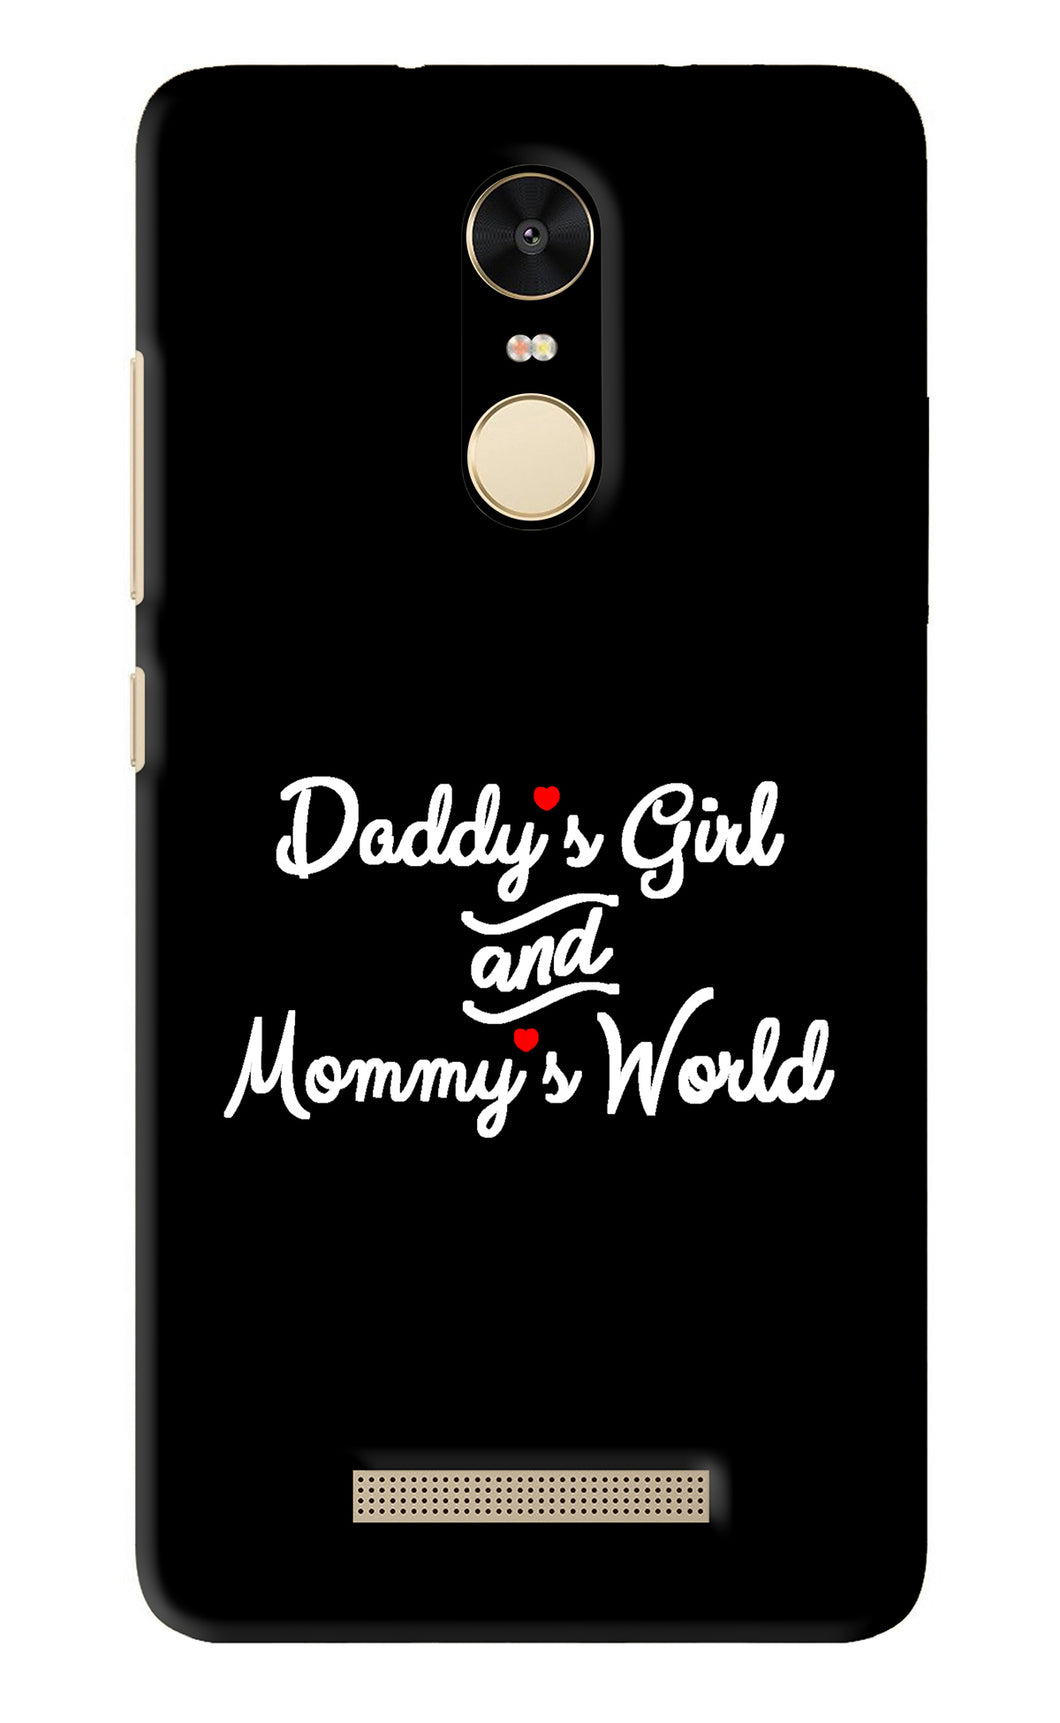 Daddy's Girl and Mommy's World Xiaomi Redmi Note 3 Back Skin Wrap